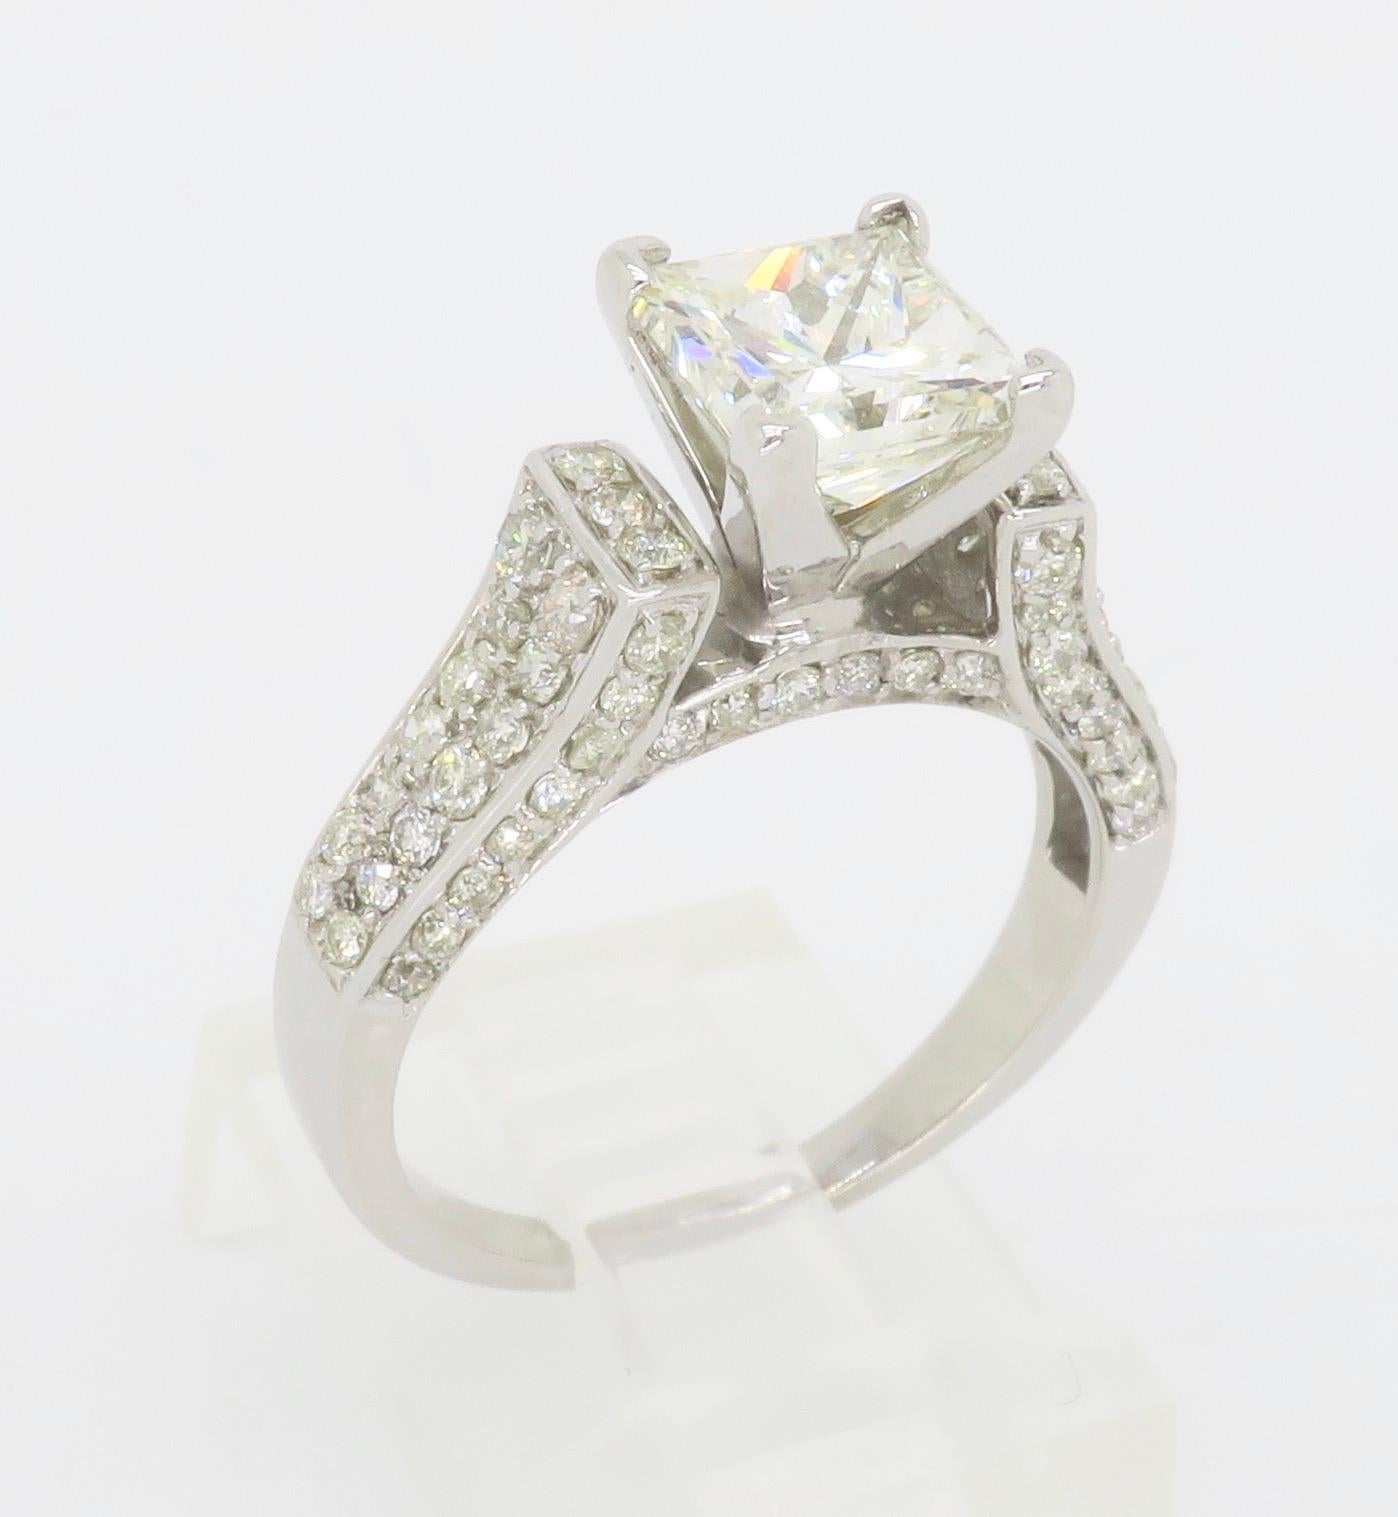 Certified 2.59ctw Princess Cut Diamond Engagement Ring For Sale 13